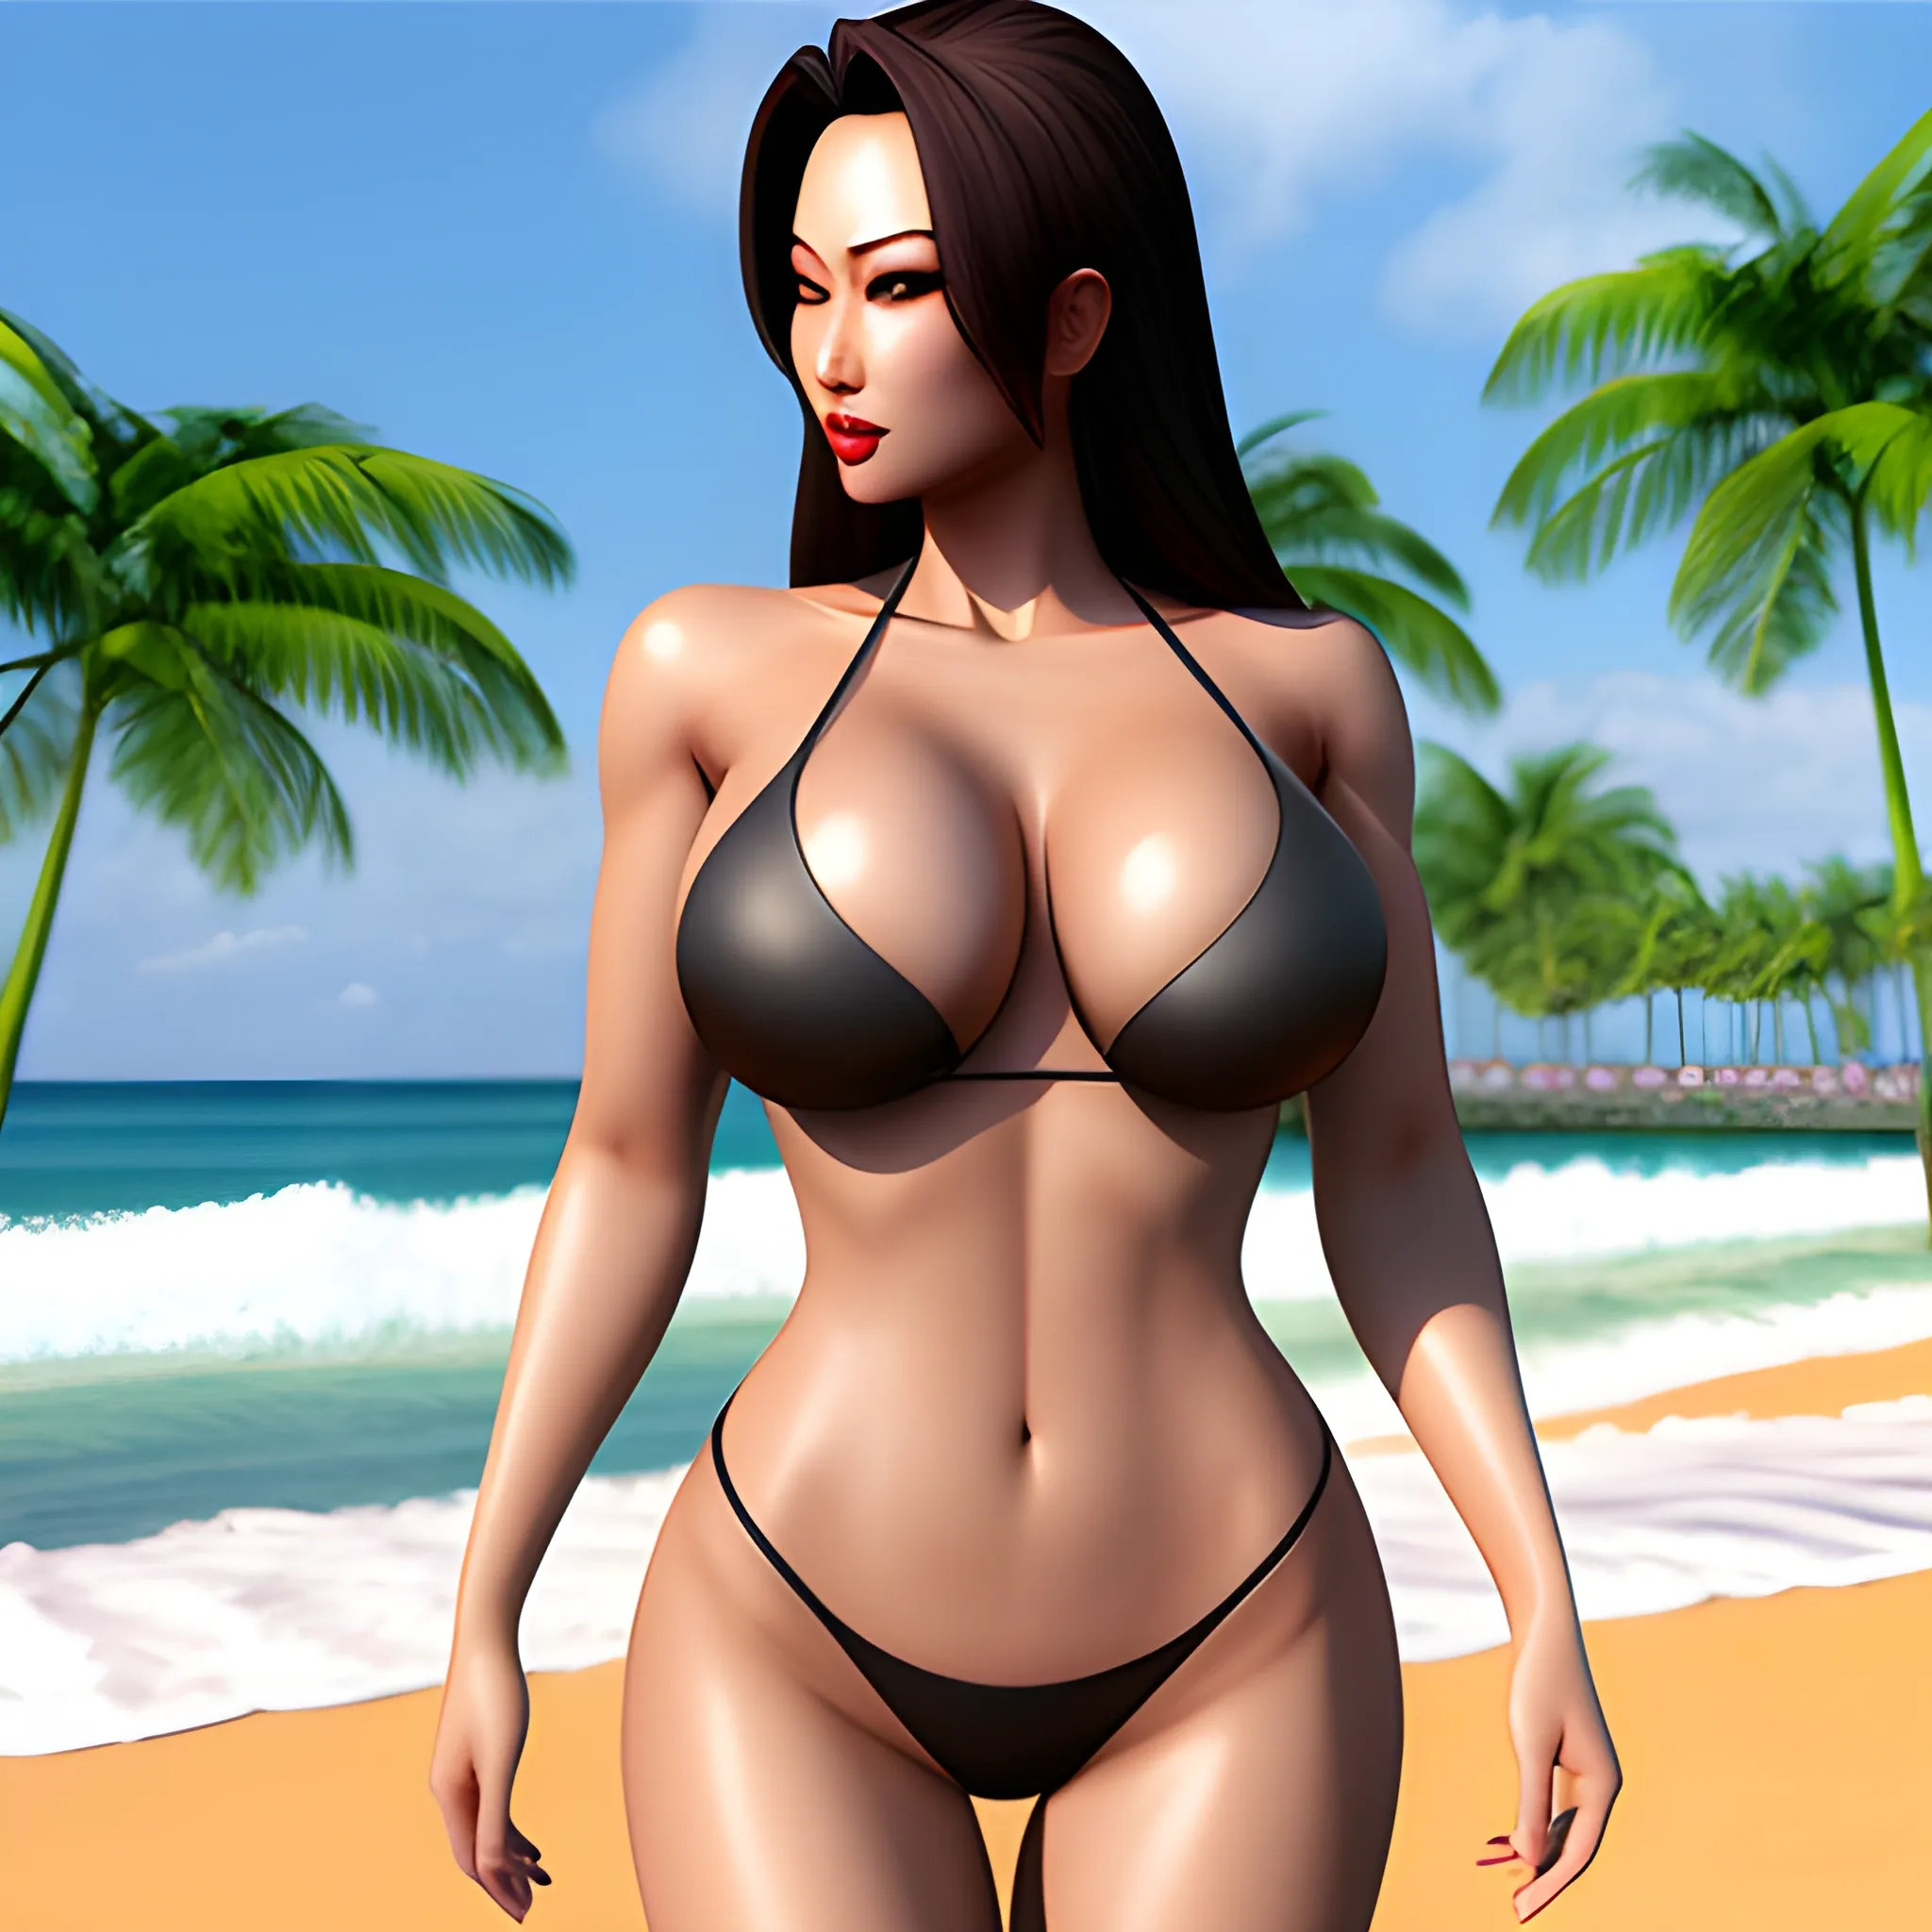 asian girl, sexy, sharp rendering, realistic, ex military, 3D, fullbody, young, hot, more realistic, beach, woman parts